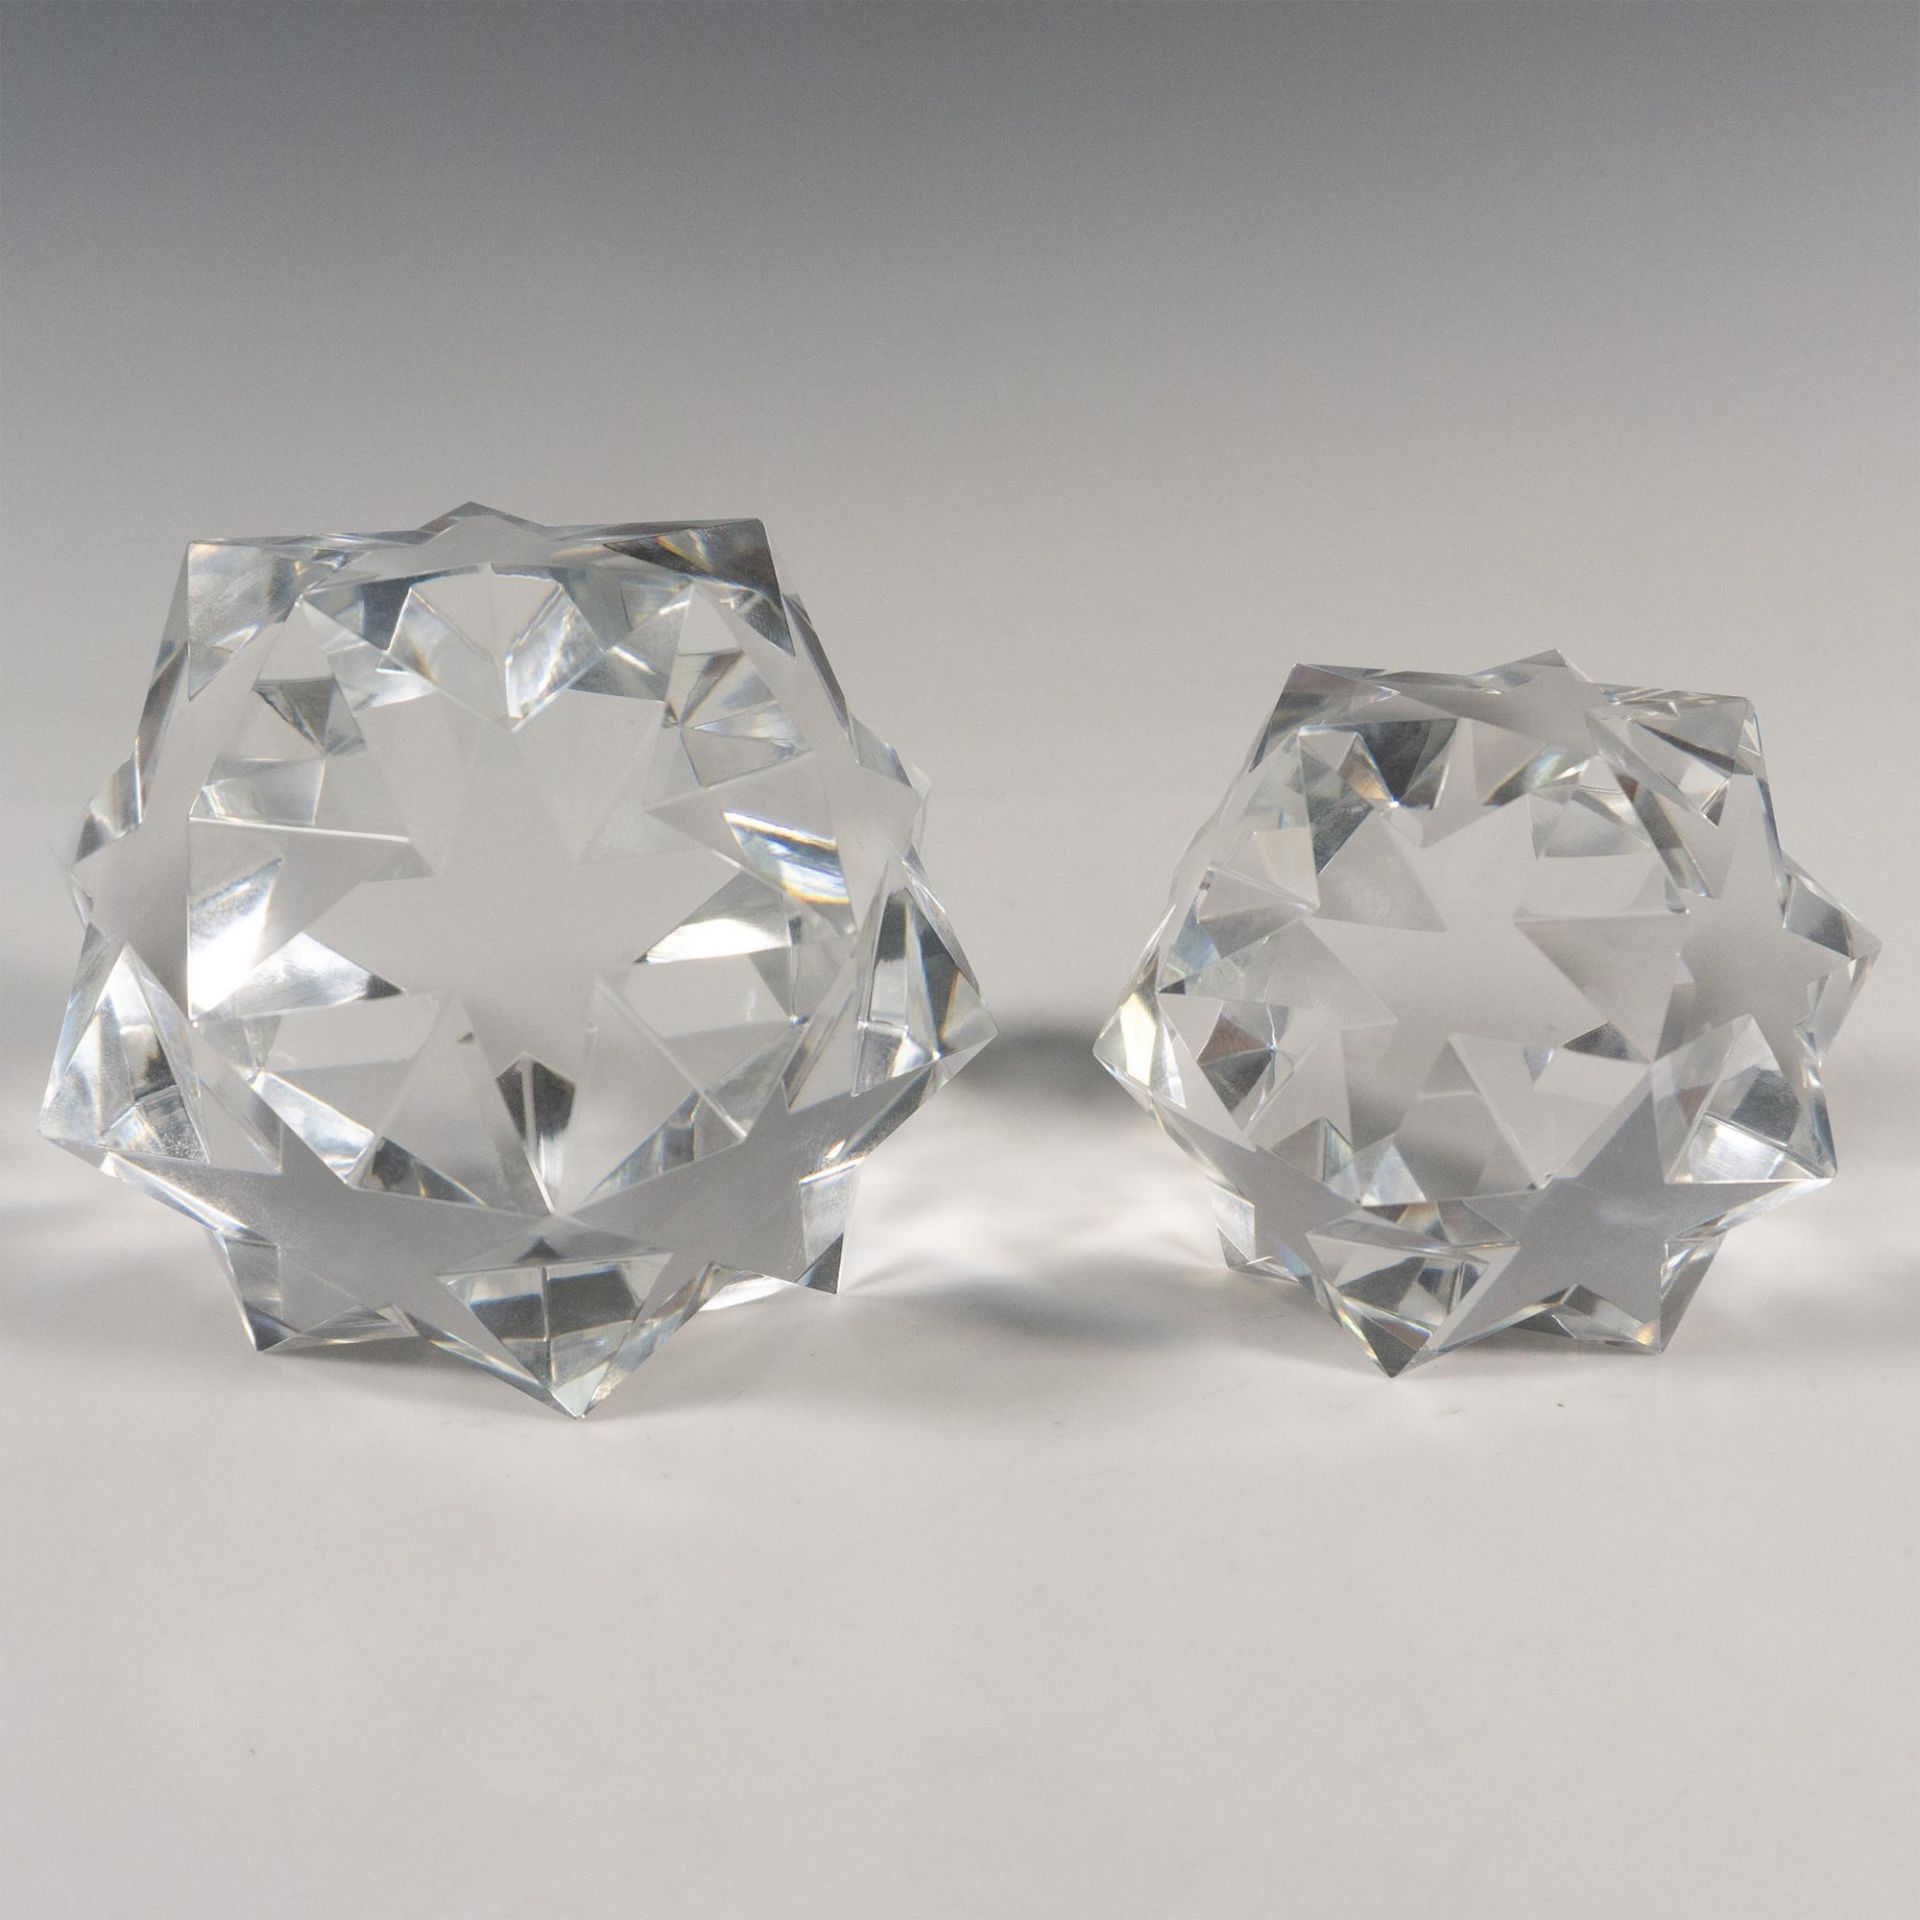 Pair of Star Dodecahedron Paperweights - Image 3 of 3